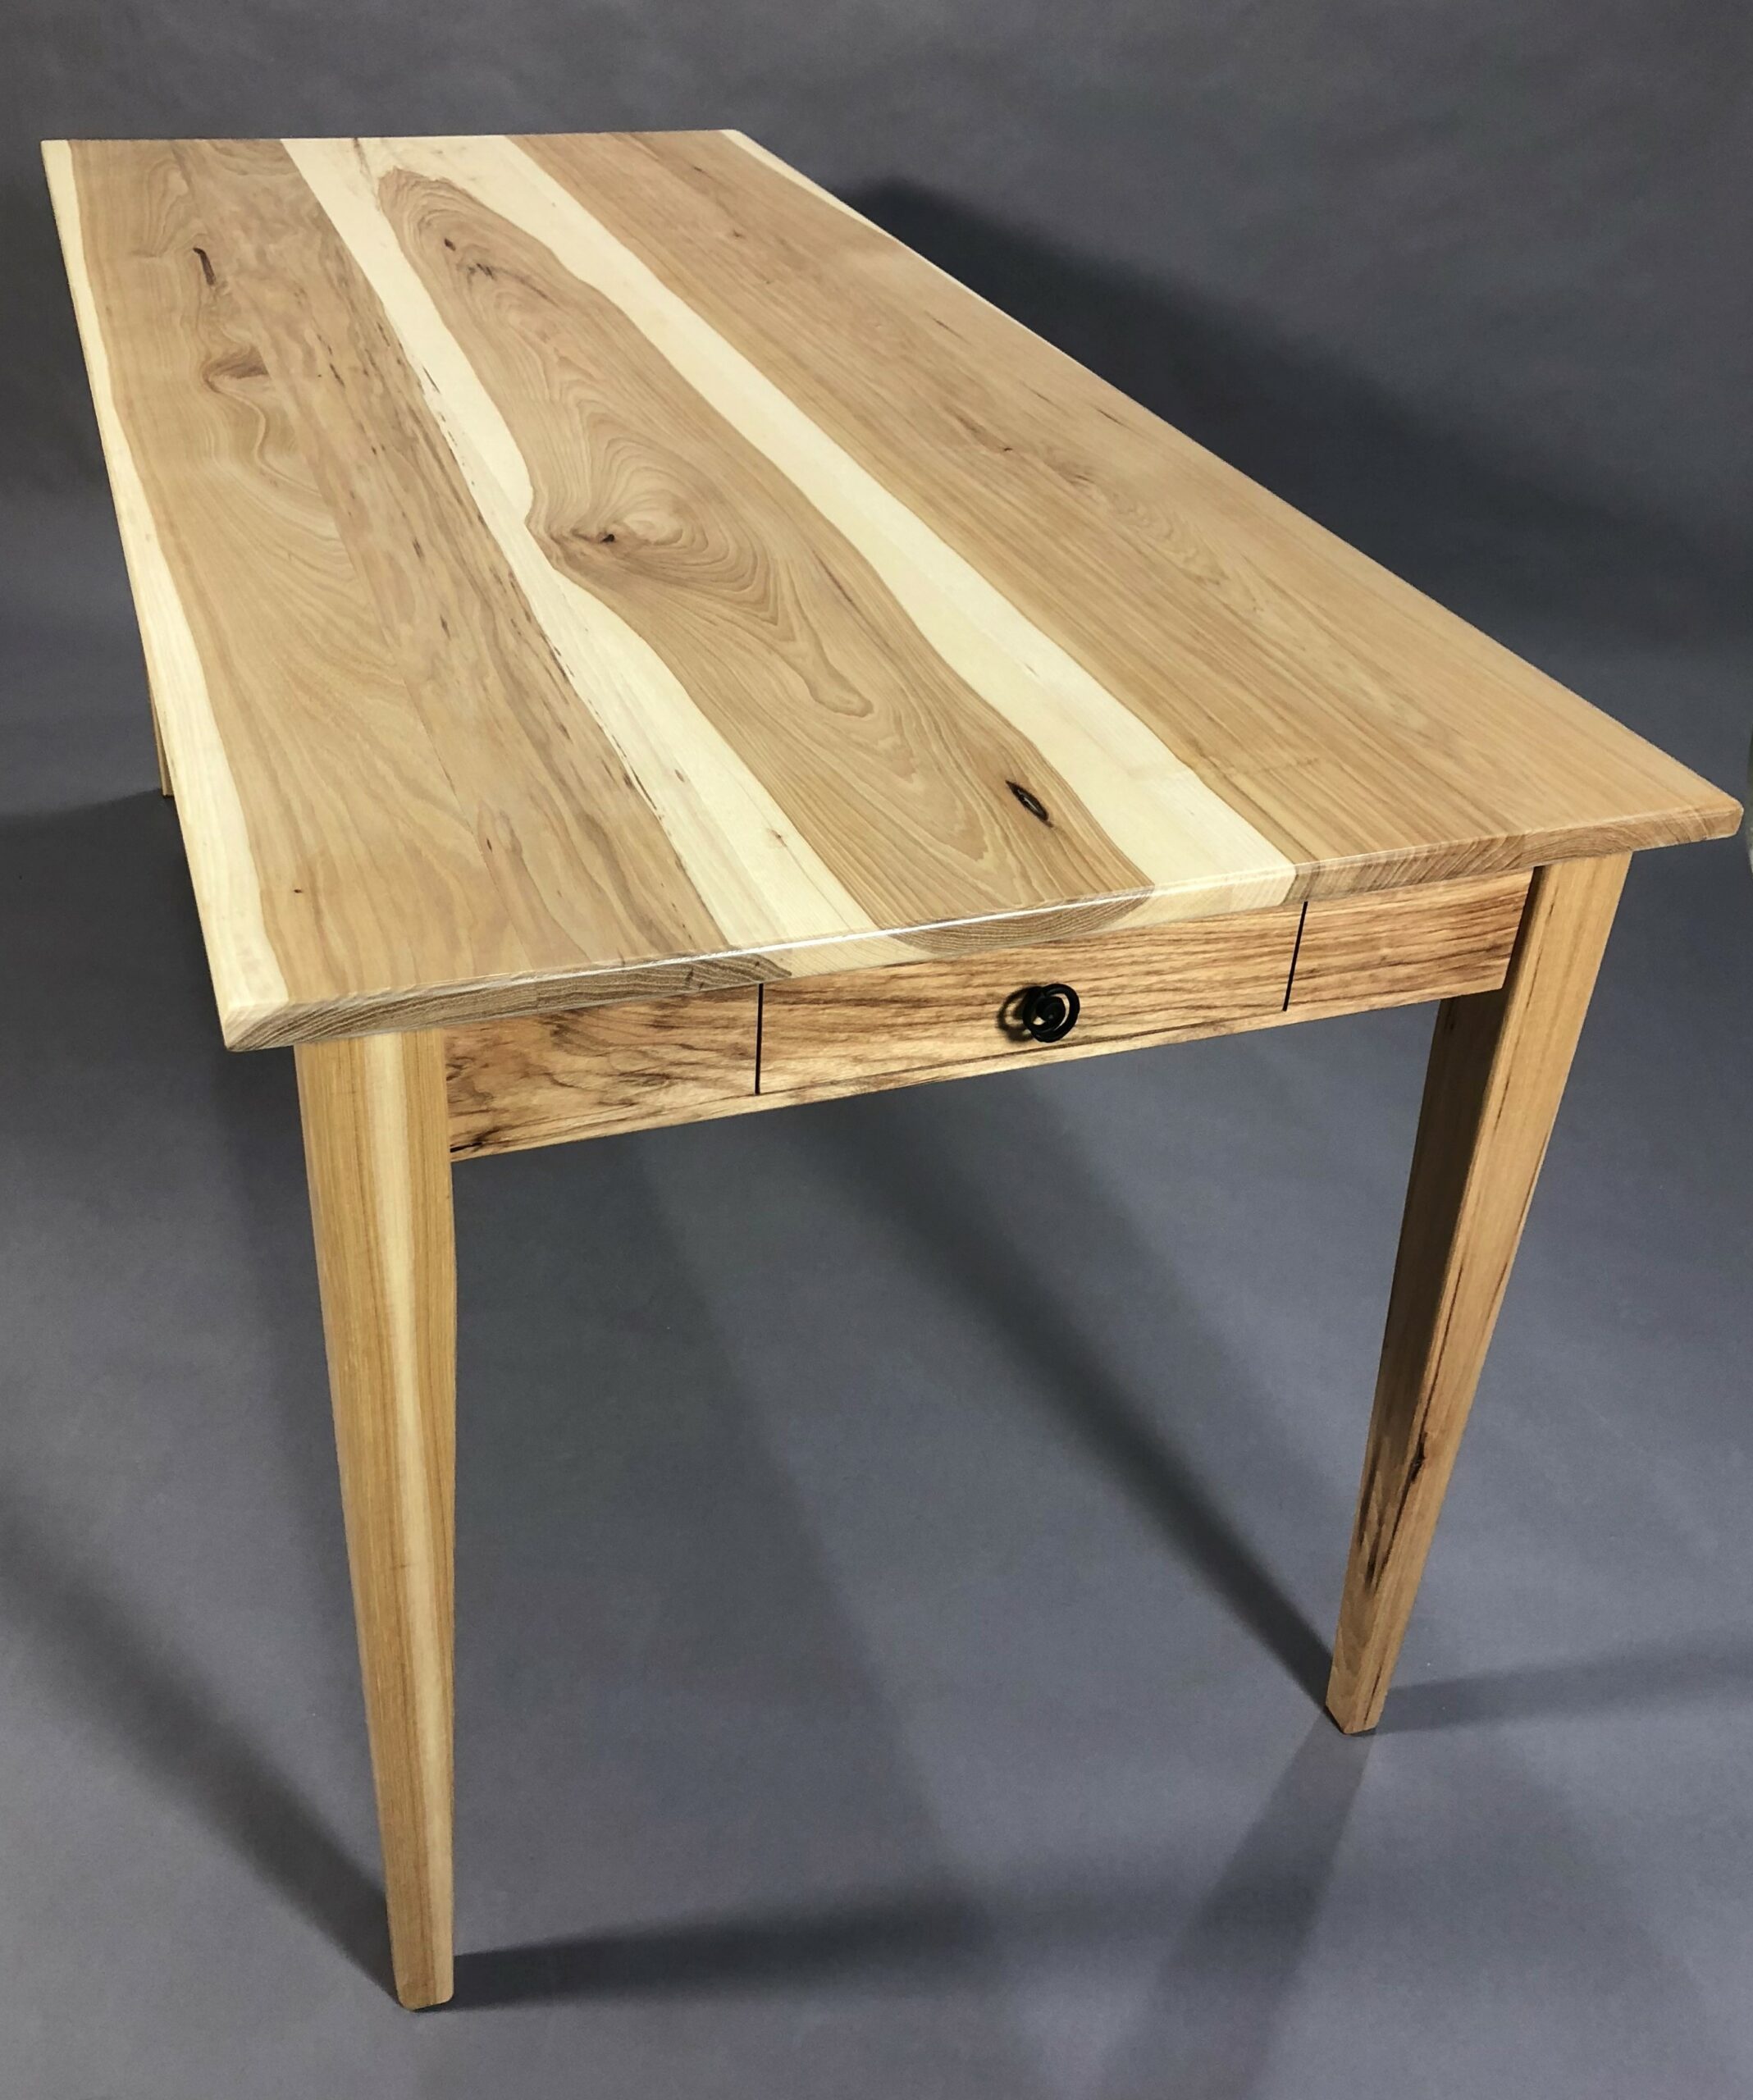 wooden table with a small drawer